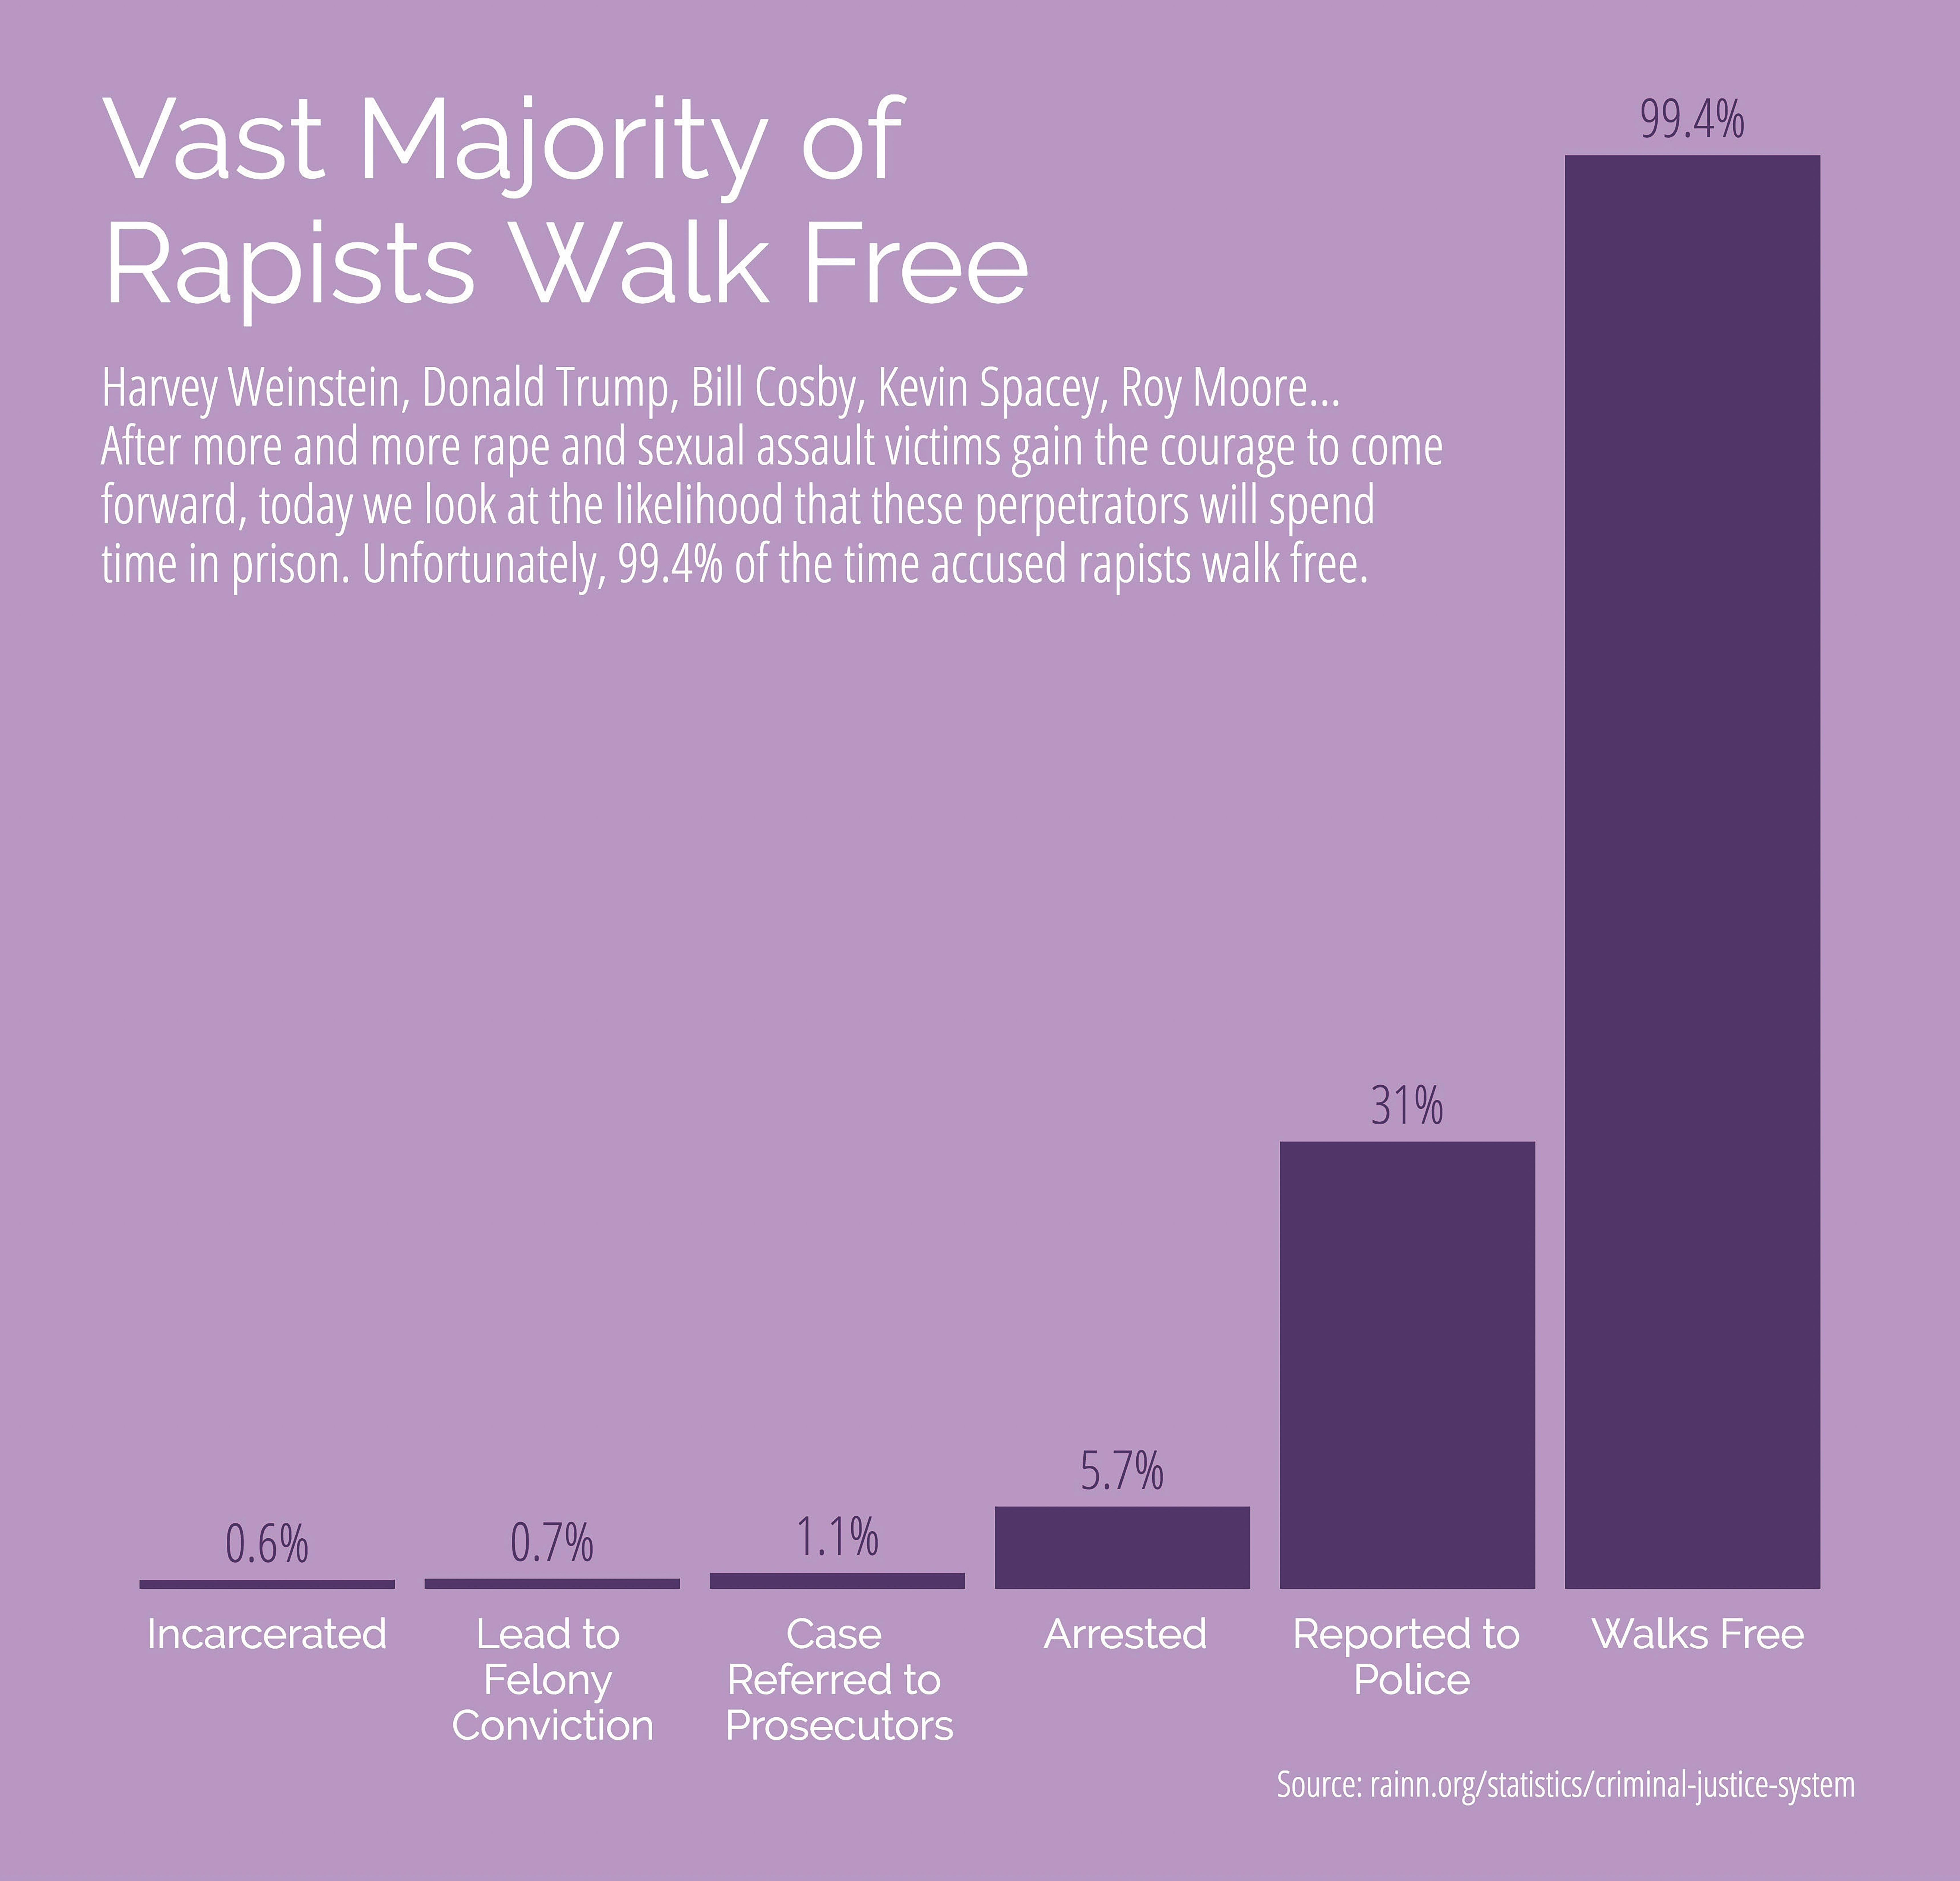 A purple bar chart showing that the majority of rapists (99.4%) walk free and only 0.6% are incarcerated.